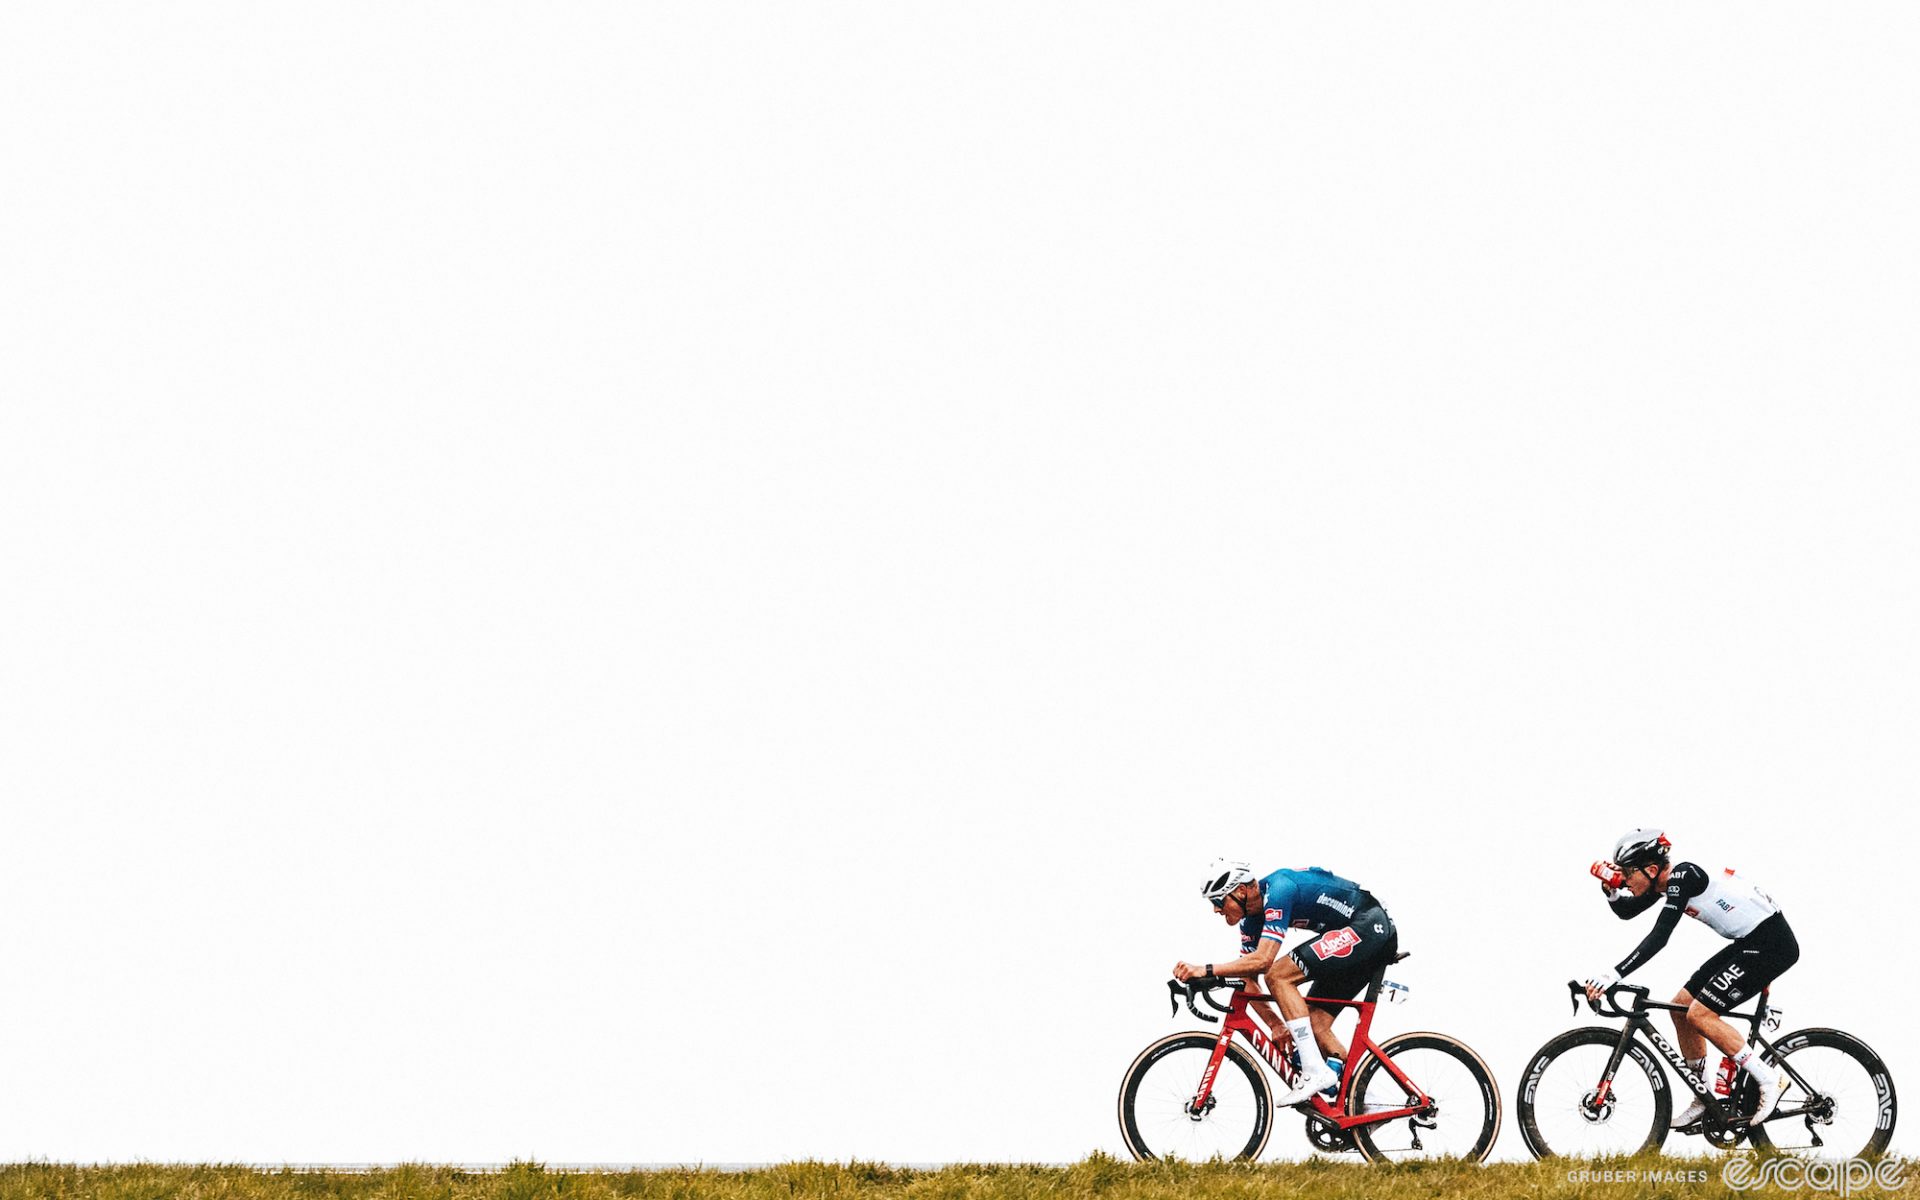 Mathieu van der Poel leads Tadej Pogačar through a flat field at the Tour of Flanders. They're shown against a blown-out white sky, with heavy contrast.